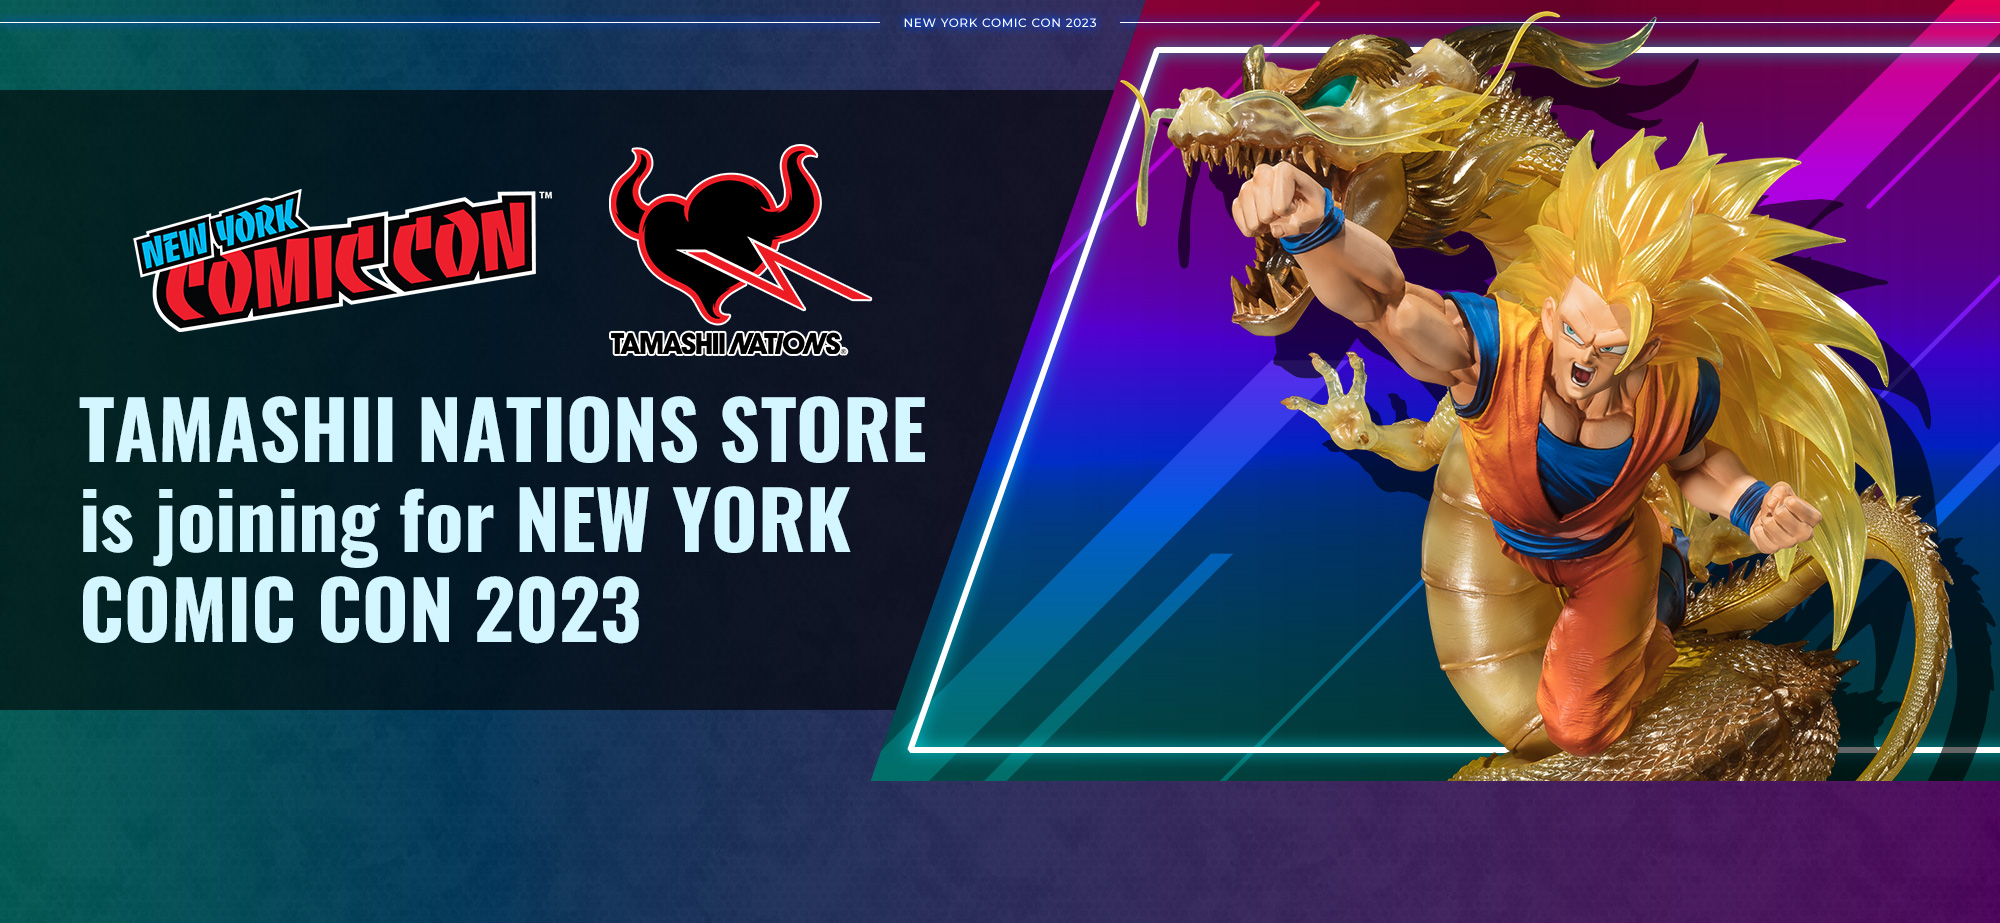 TAMASHII NATIONS STORE is joining for NEW YORK COMIC CON 2023